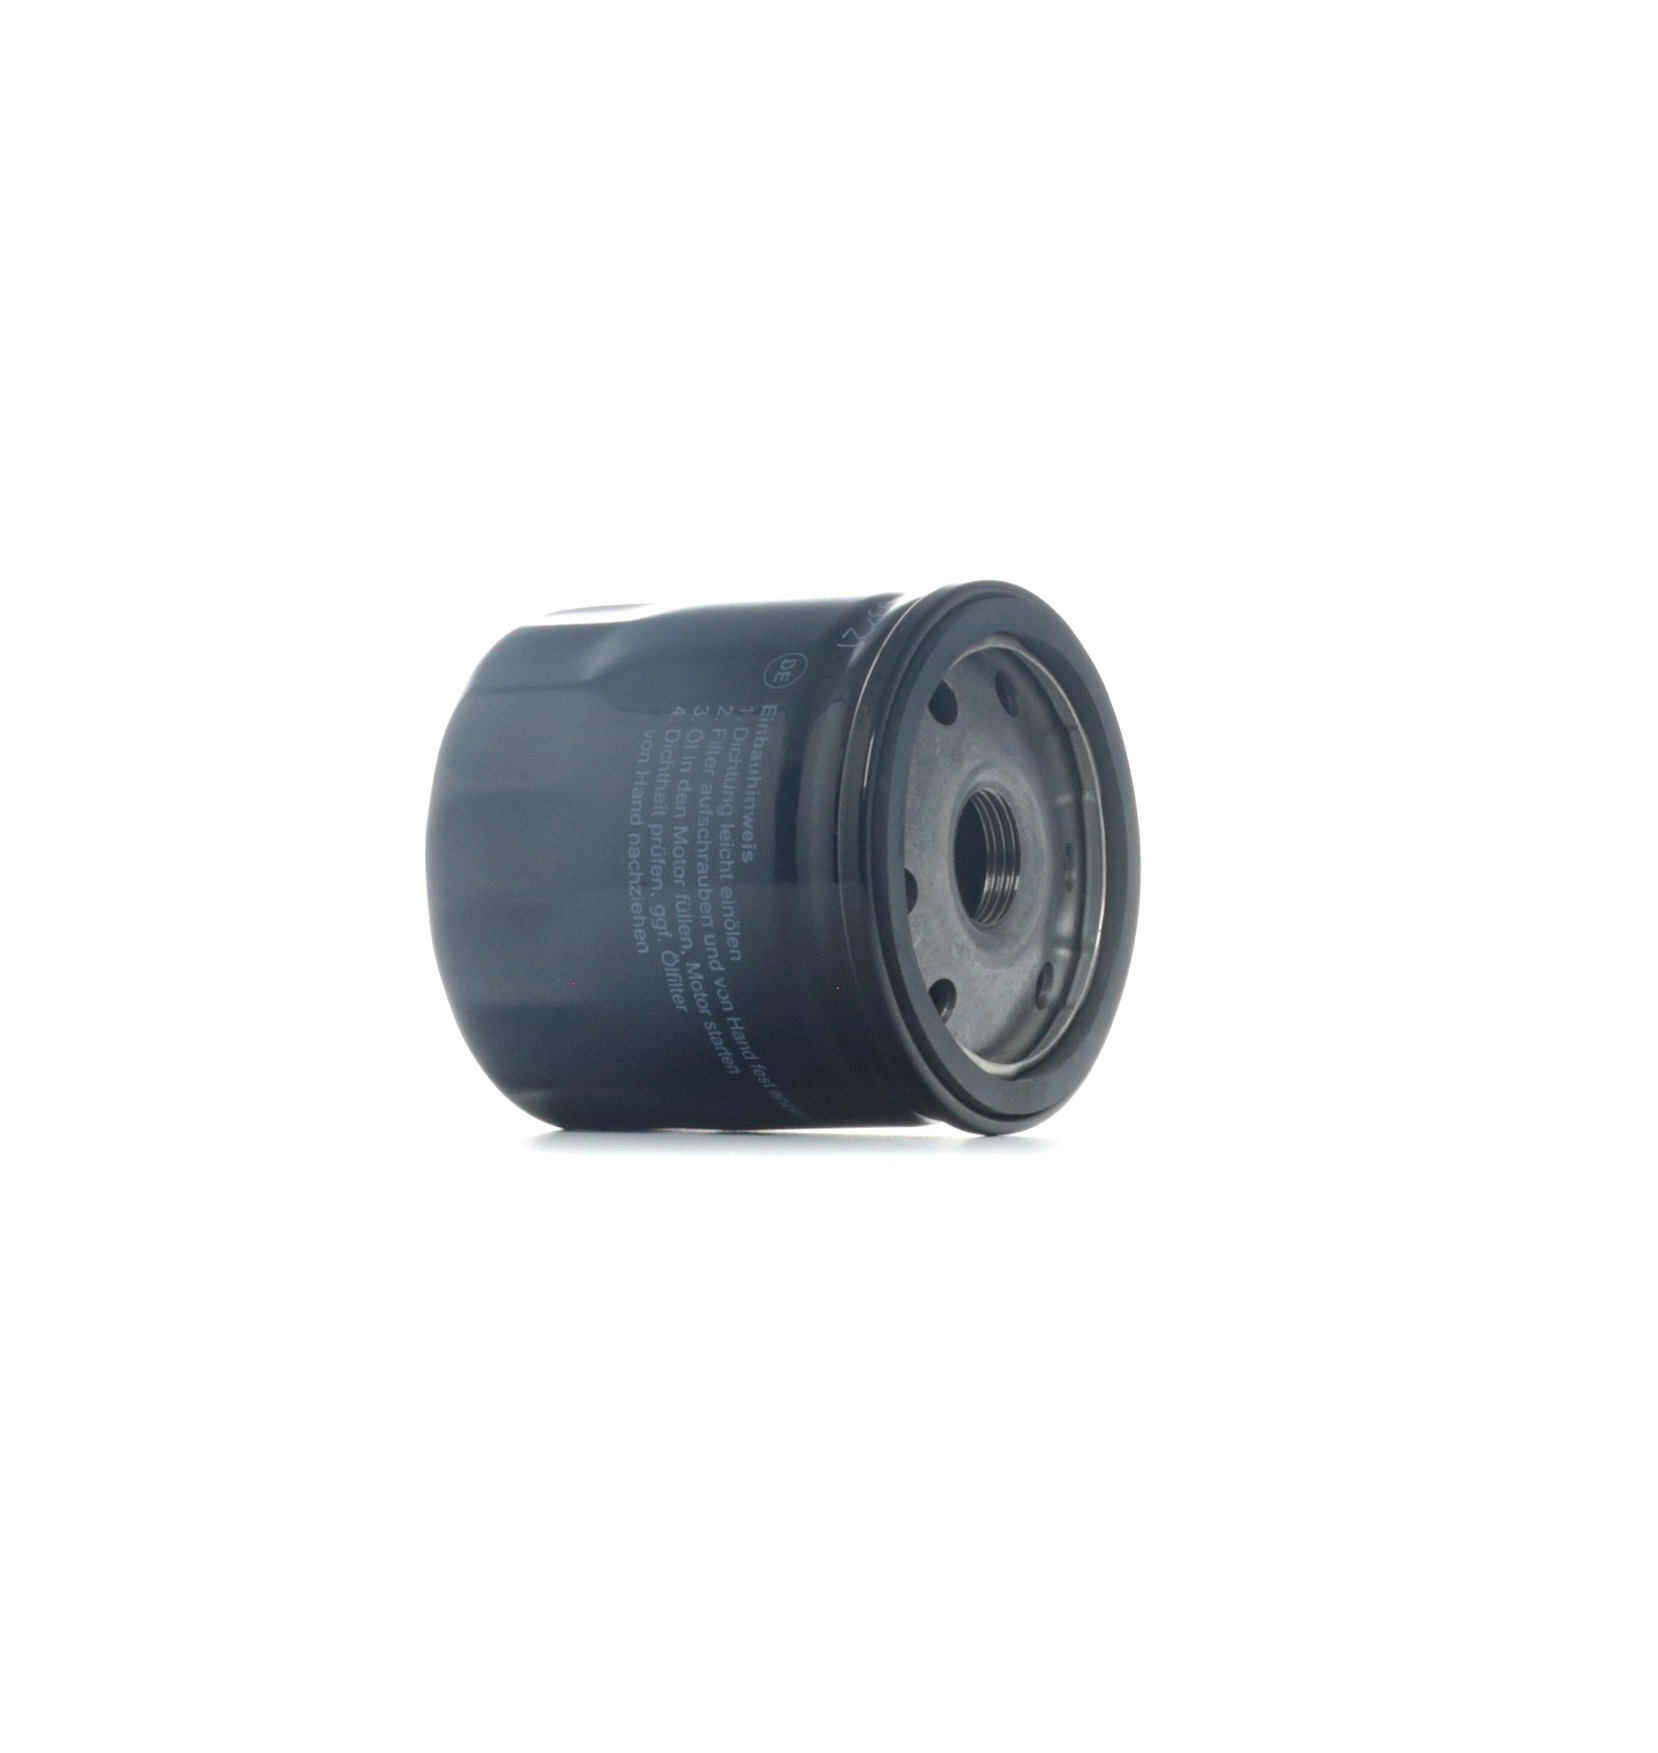 MEYLE 16-14 322 0011 Oil filter M20x1,5, ORIGINAL Quality, with one anti-return valve, Spin-on Filter